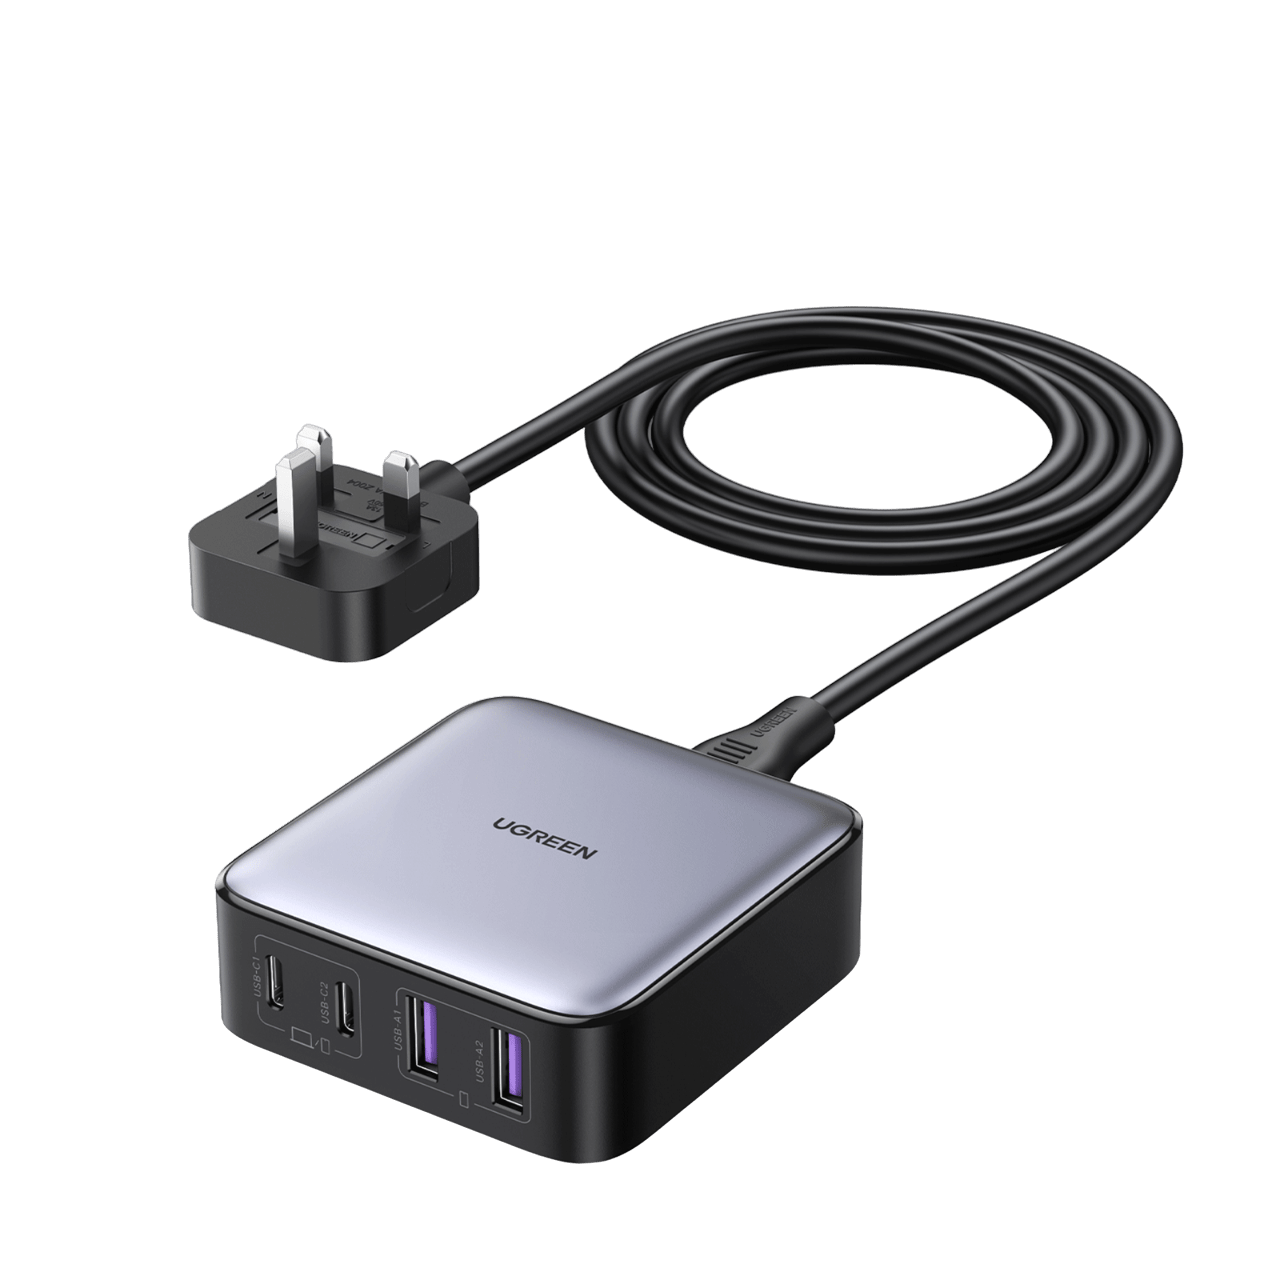 Ugreen 66 W PPS 3 A Multiport Mobile Charger - Ugreen 